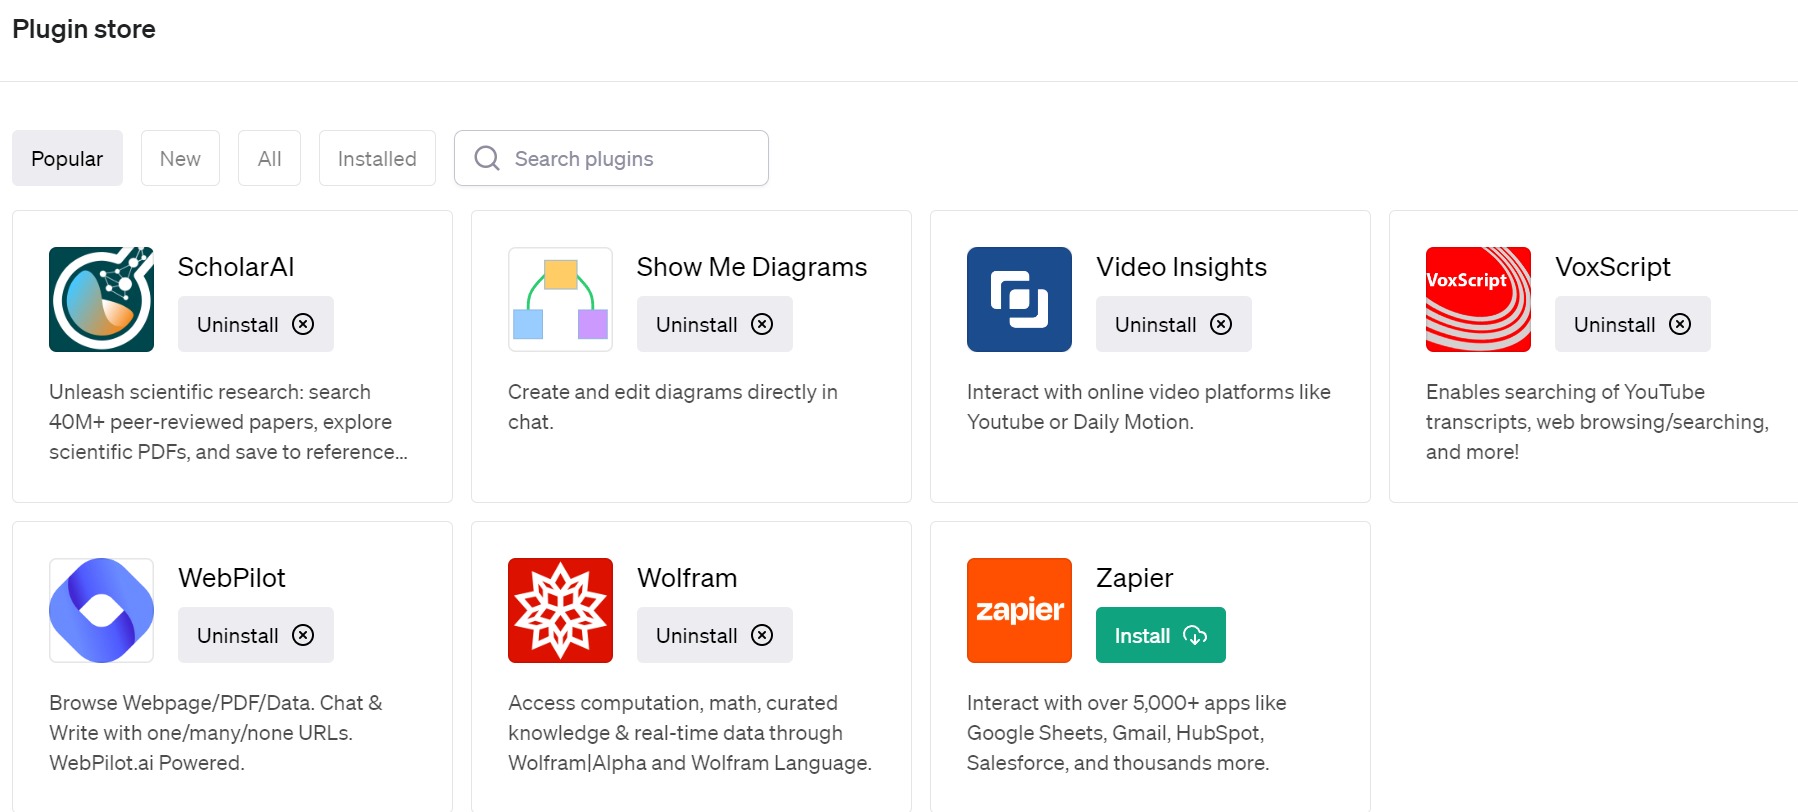 A screenshot of the ChatGPT-4 plugin store window where users can search for and activate up to three plugins for any given conversation. Example plugins shown on this page of popular plugins include ScholarAI, Show Me Diagrams, Video Insights, VoxScript, WebPilot, Wolfram, and Zapier.